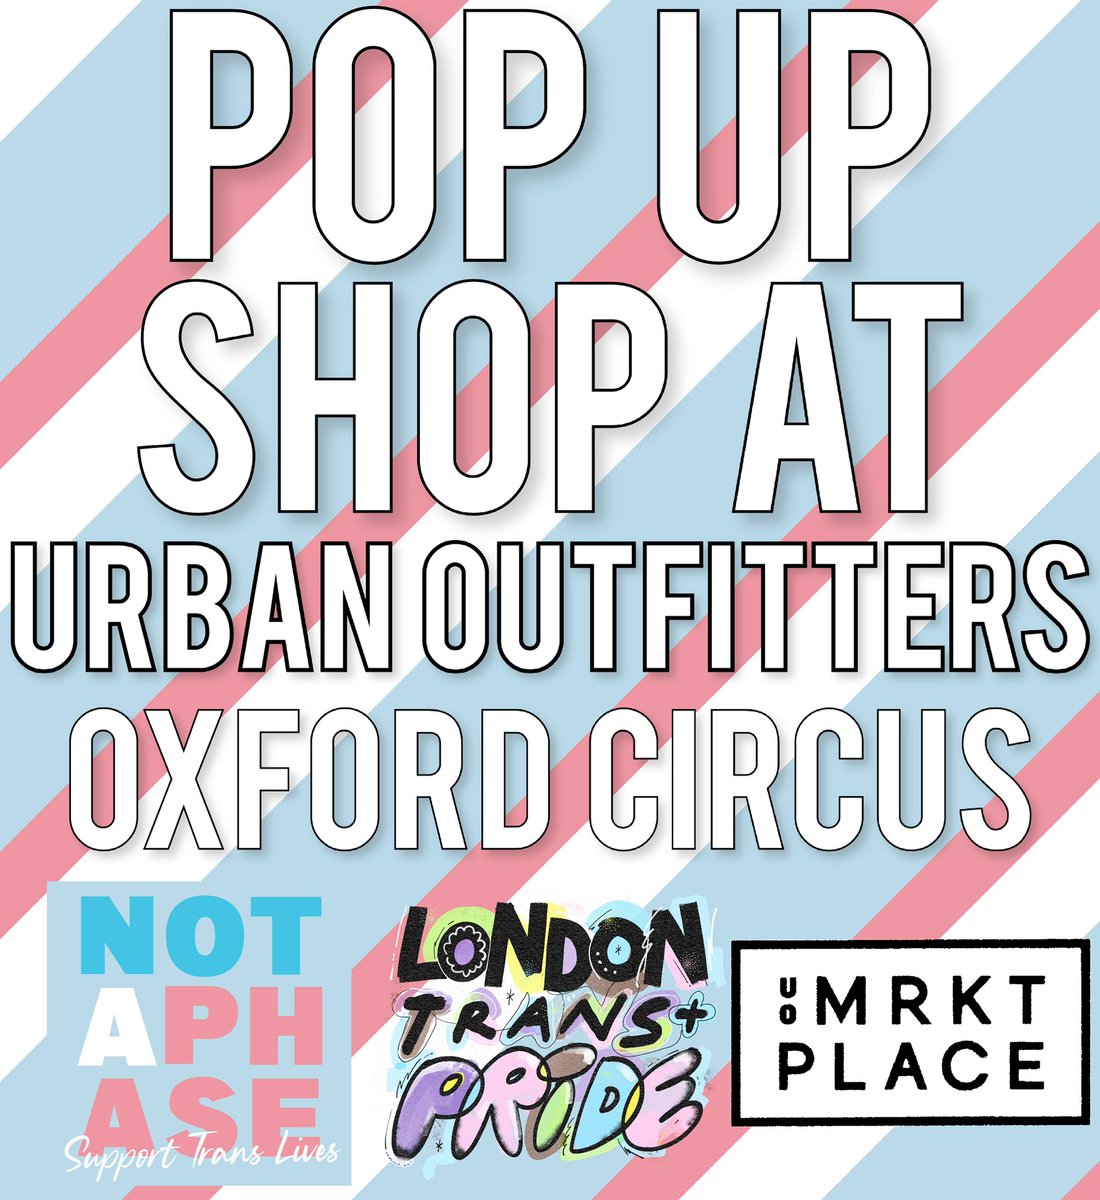 In preparation for Trans Pride London, we have teamed up with @uoeurope to launch our pop up store Urban Outfitters Oxford Circus this week on Thursday, Friday and Saturday for you to pop in and grab one of our tees for the big day! Full details on our insta!